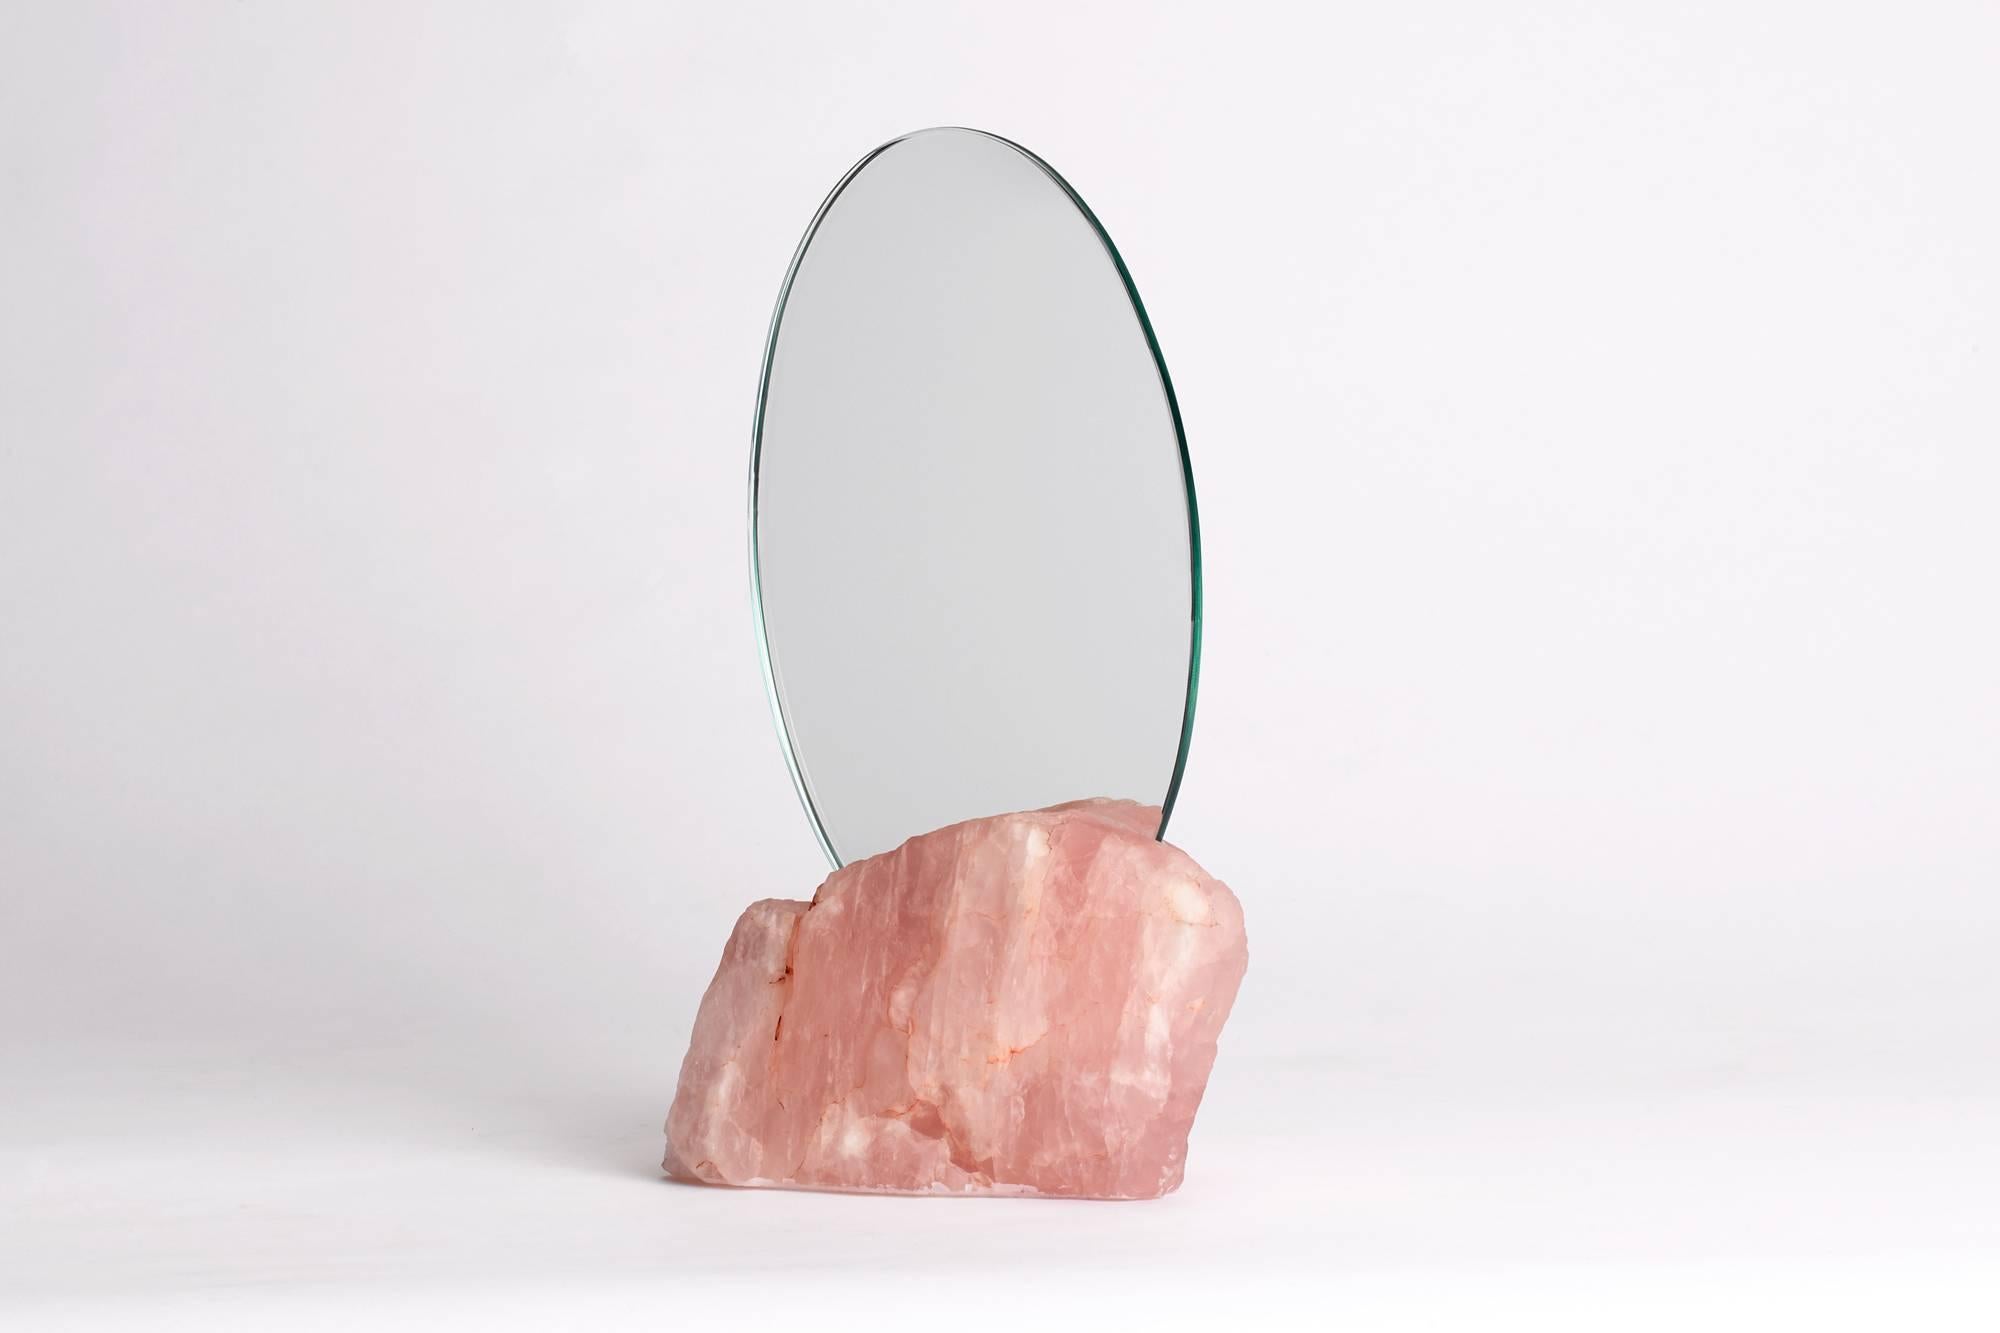 The Aura mirrors are crafted using semi-precious stones, pierced by monolithic mirrors projecting an air of being both ethereal and brooding. The crystals and stones are believed to have different metaphysical properties, while the mirrors